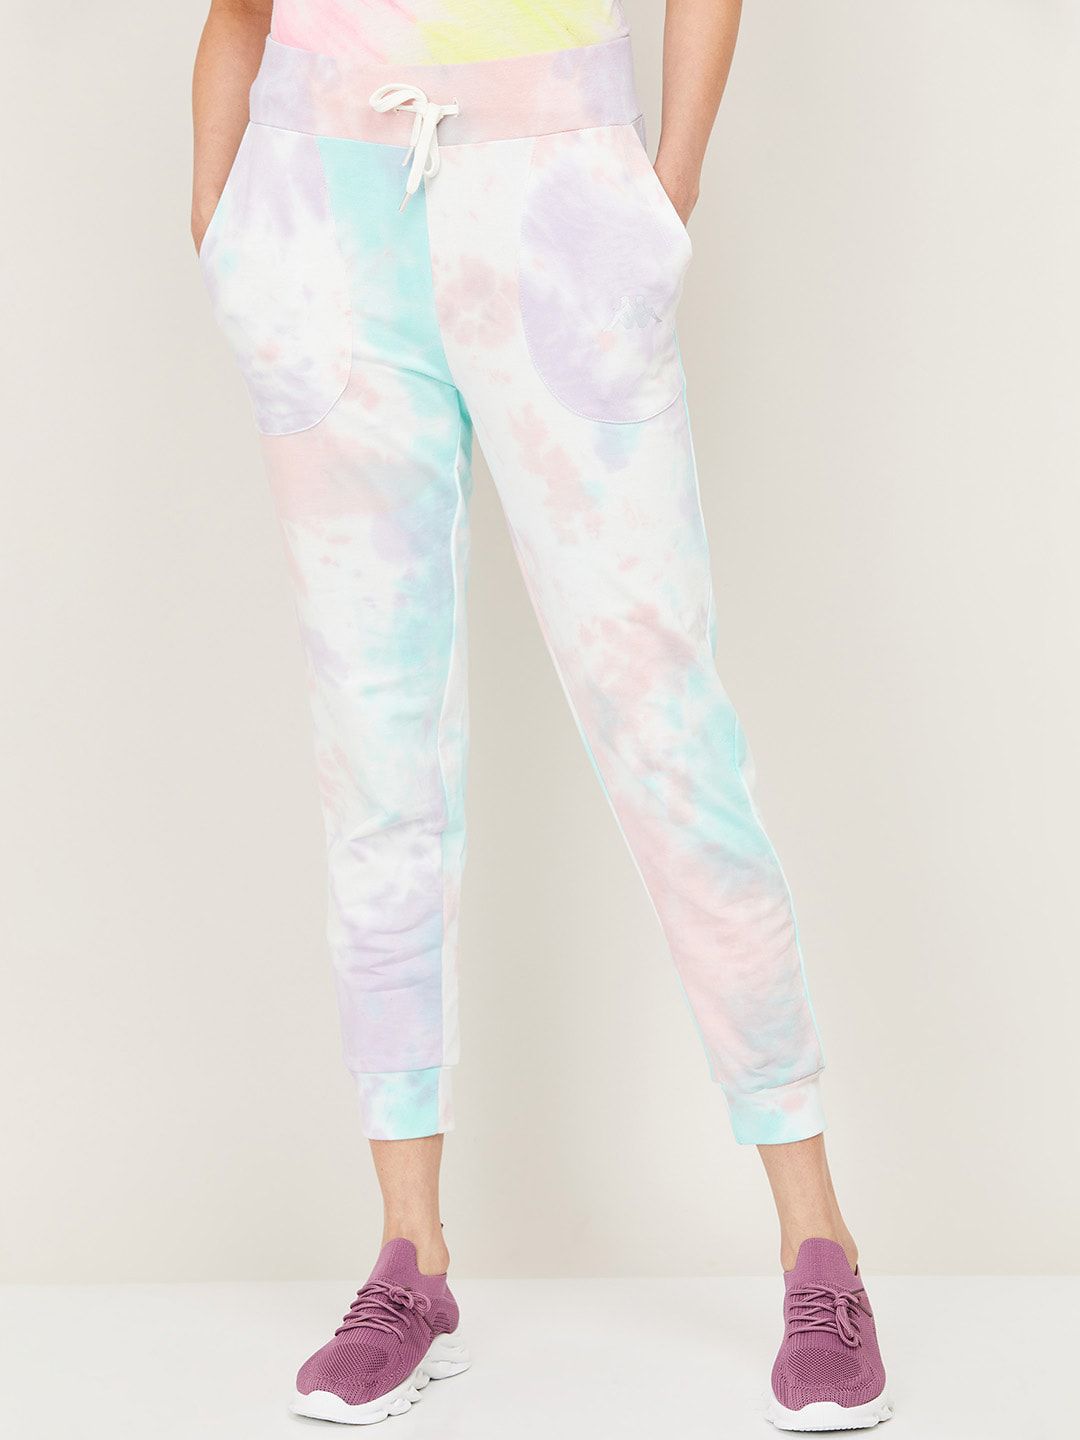 Kappa Women White & Blue Dyed Slim-Fit Pure Cotton Joggers Price in India